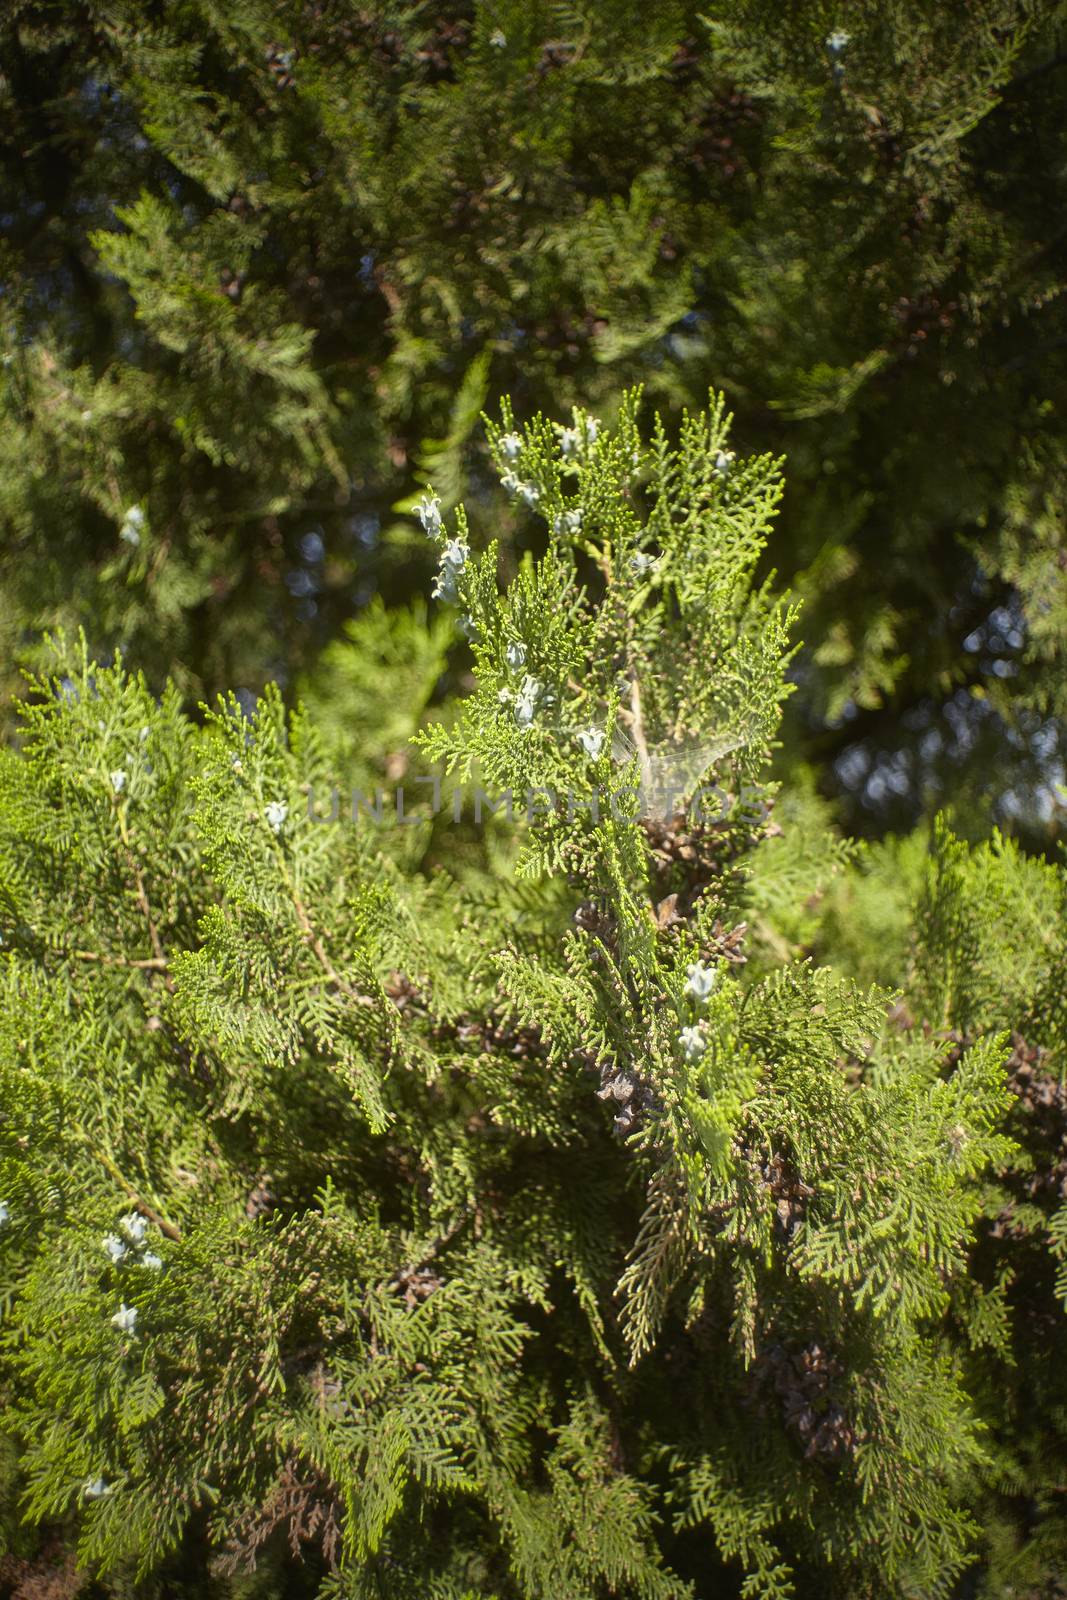 Detail of the texture of a pine tree illuminated by spring sunlight.